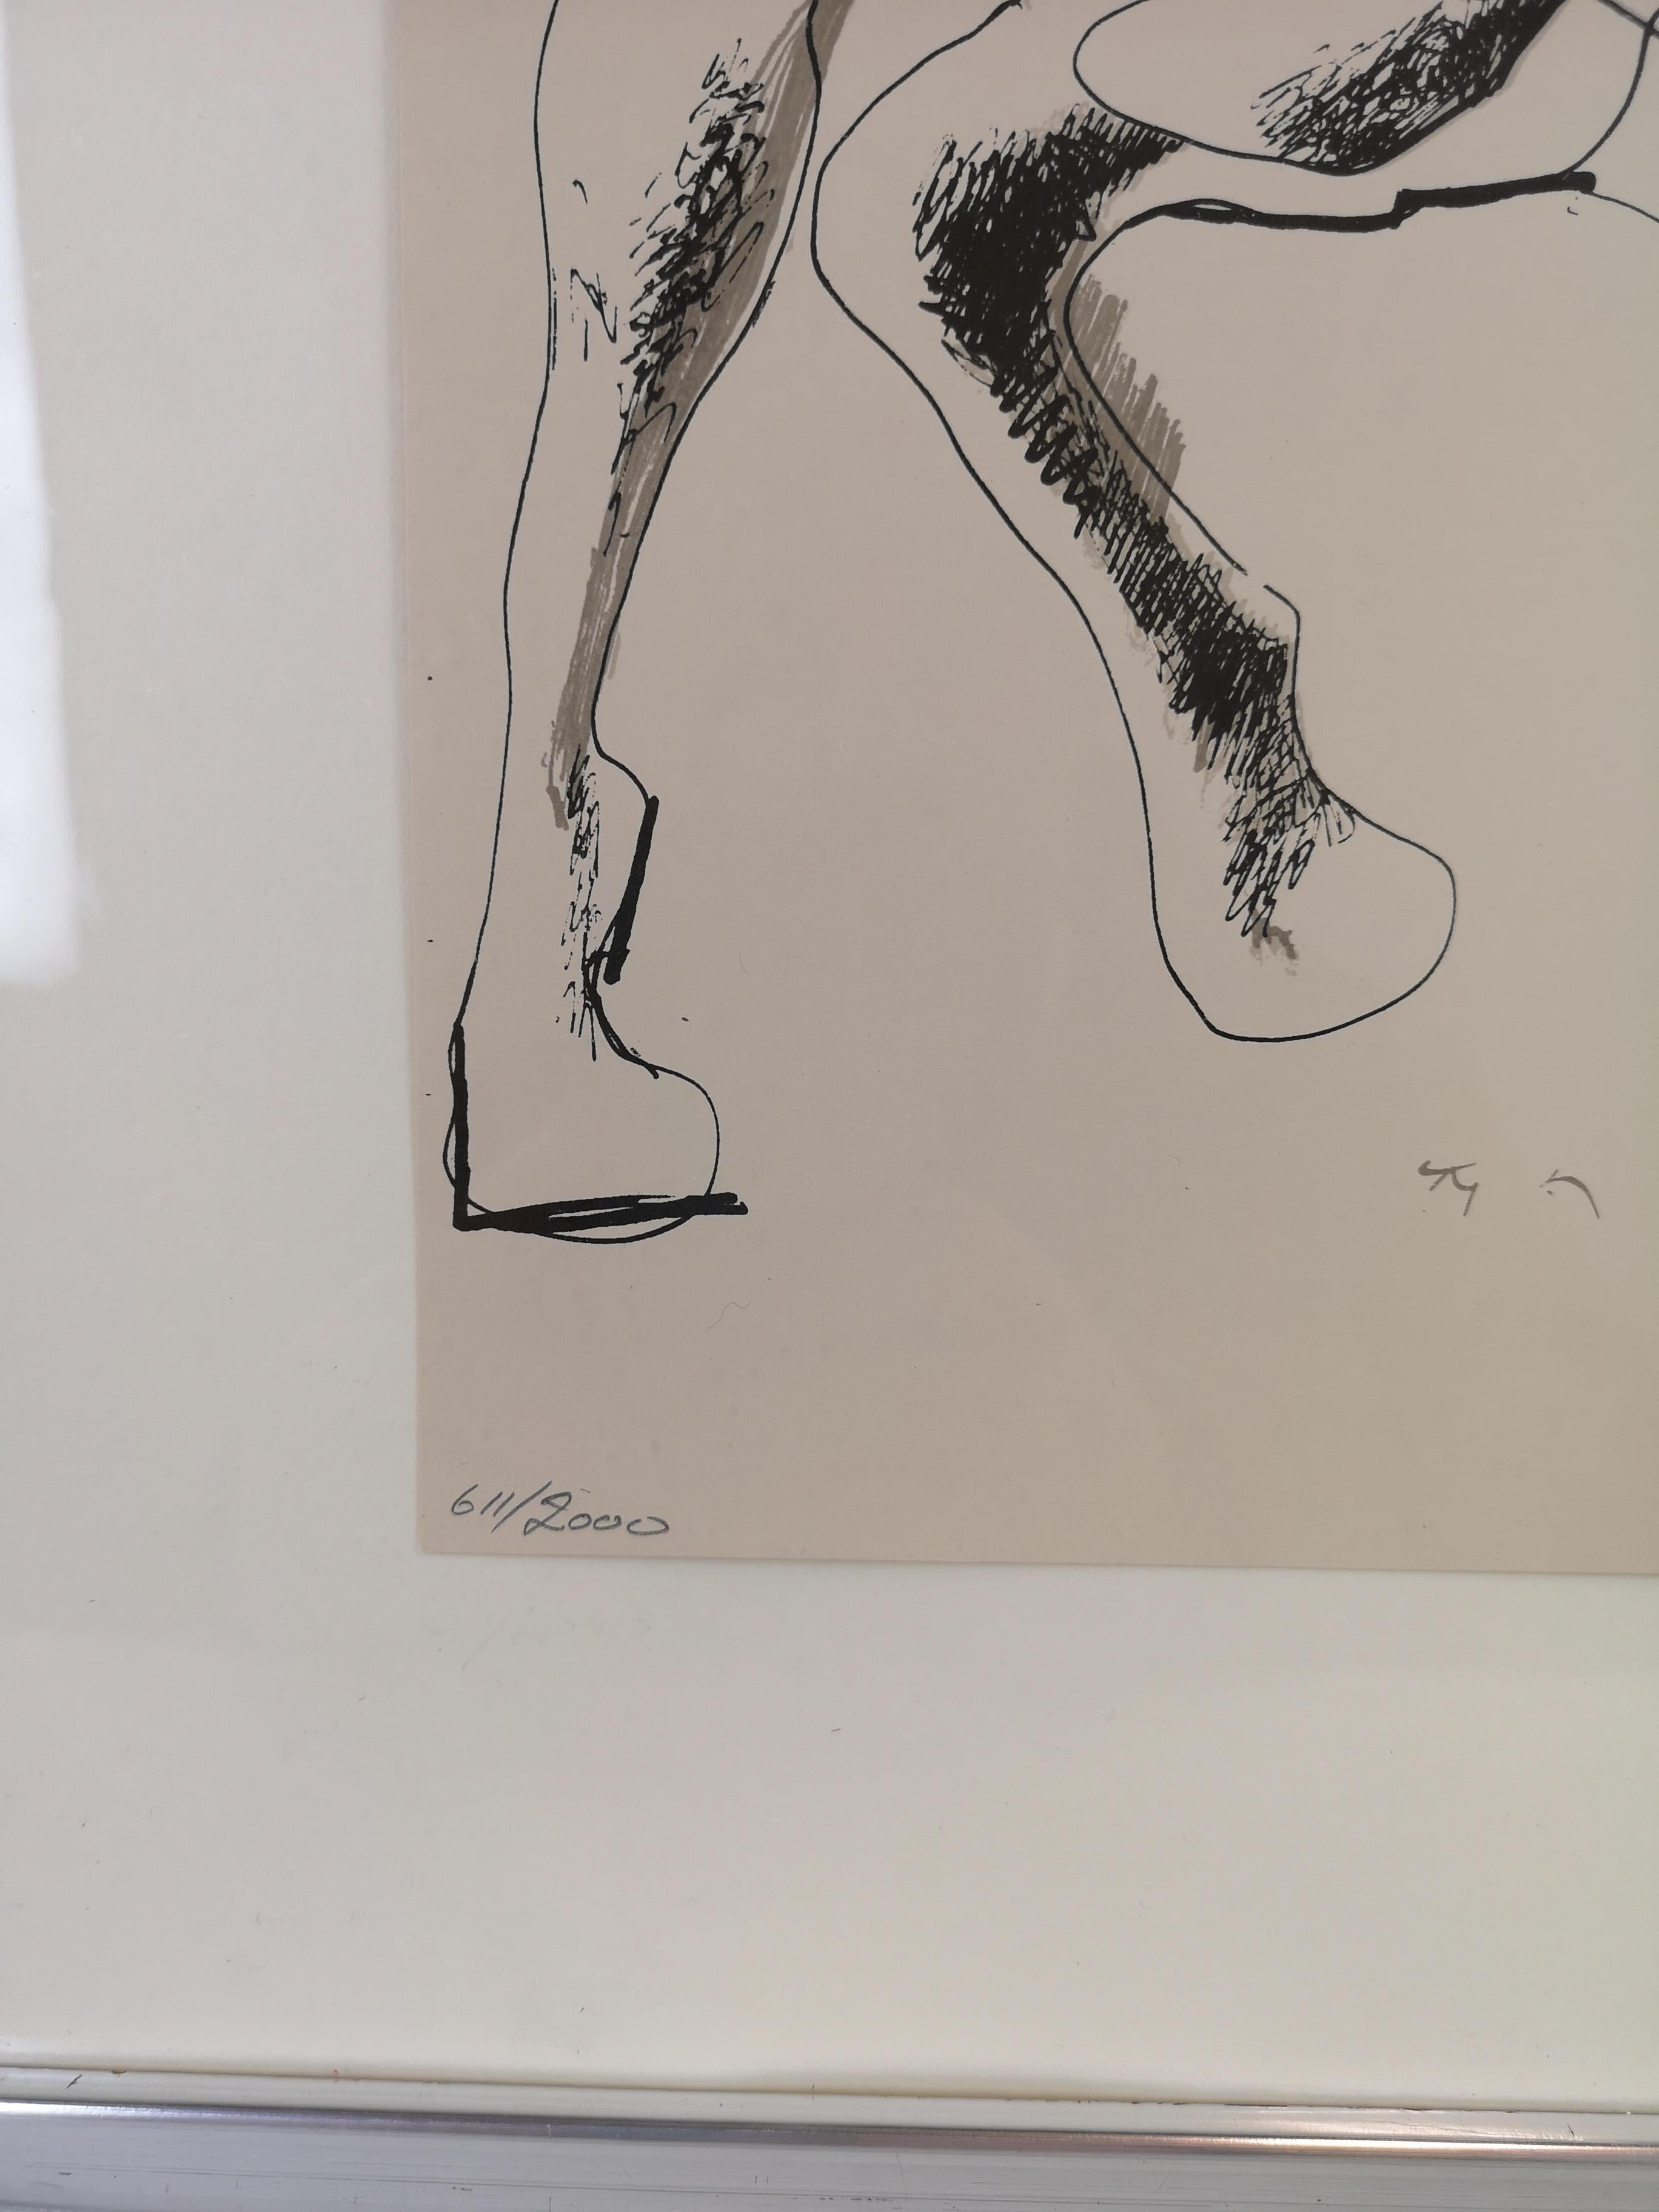 Mid-Century Modern Lithograph after a Drawing by Marino Marini